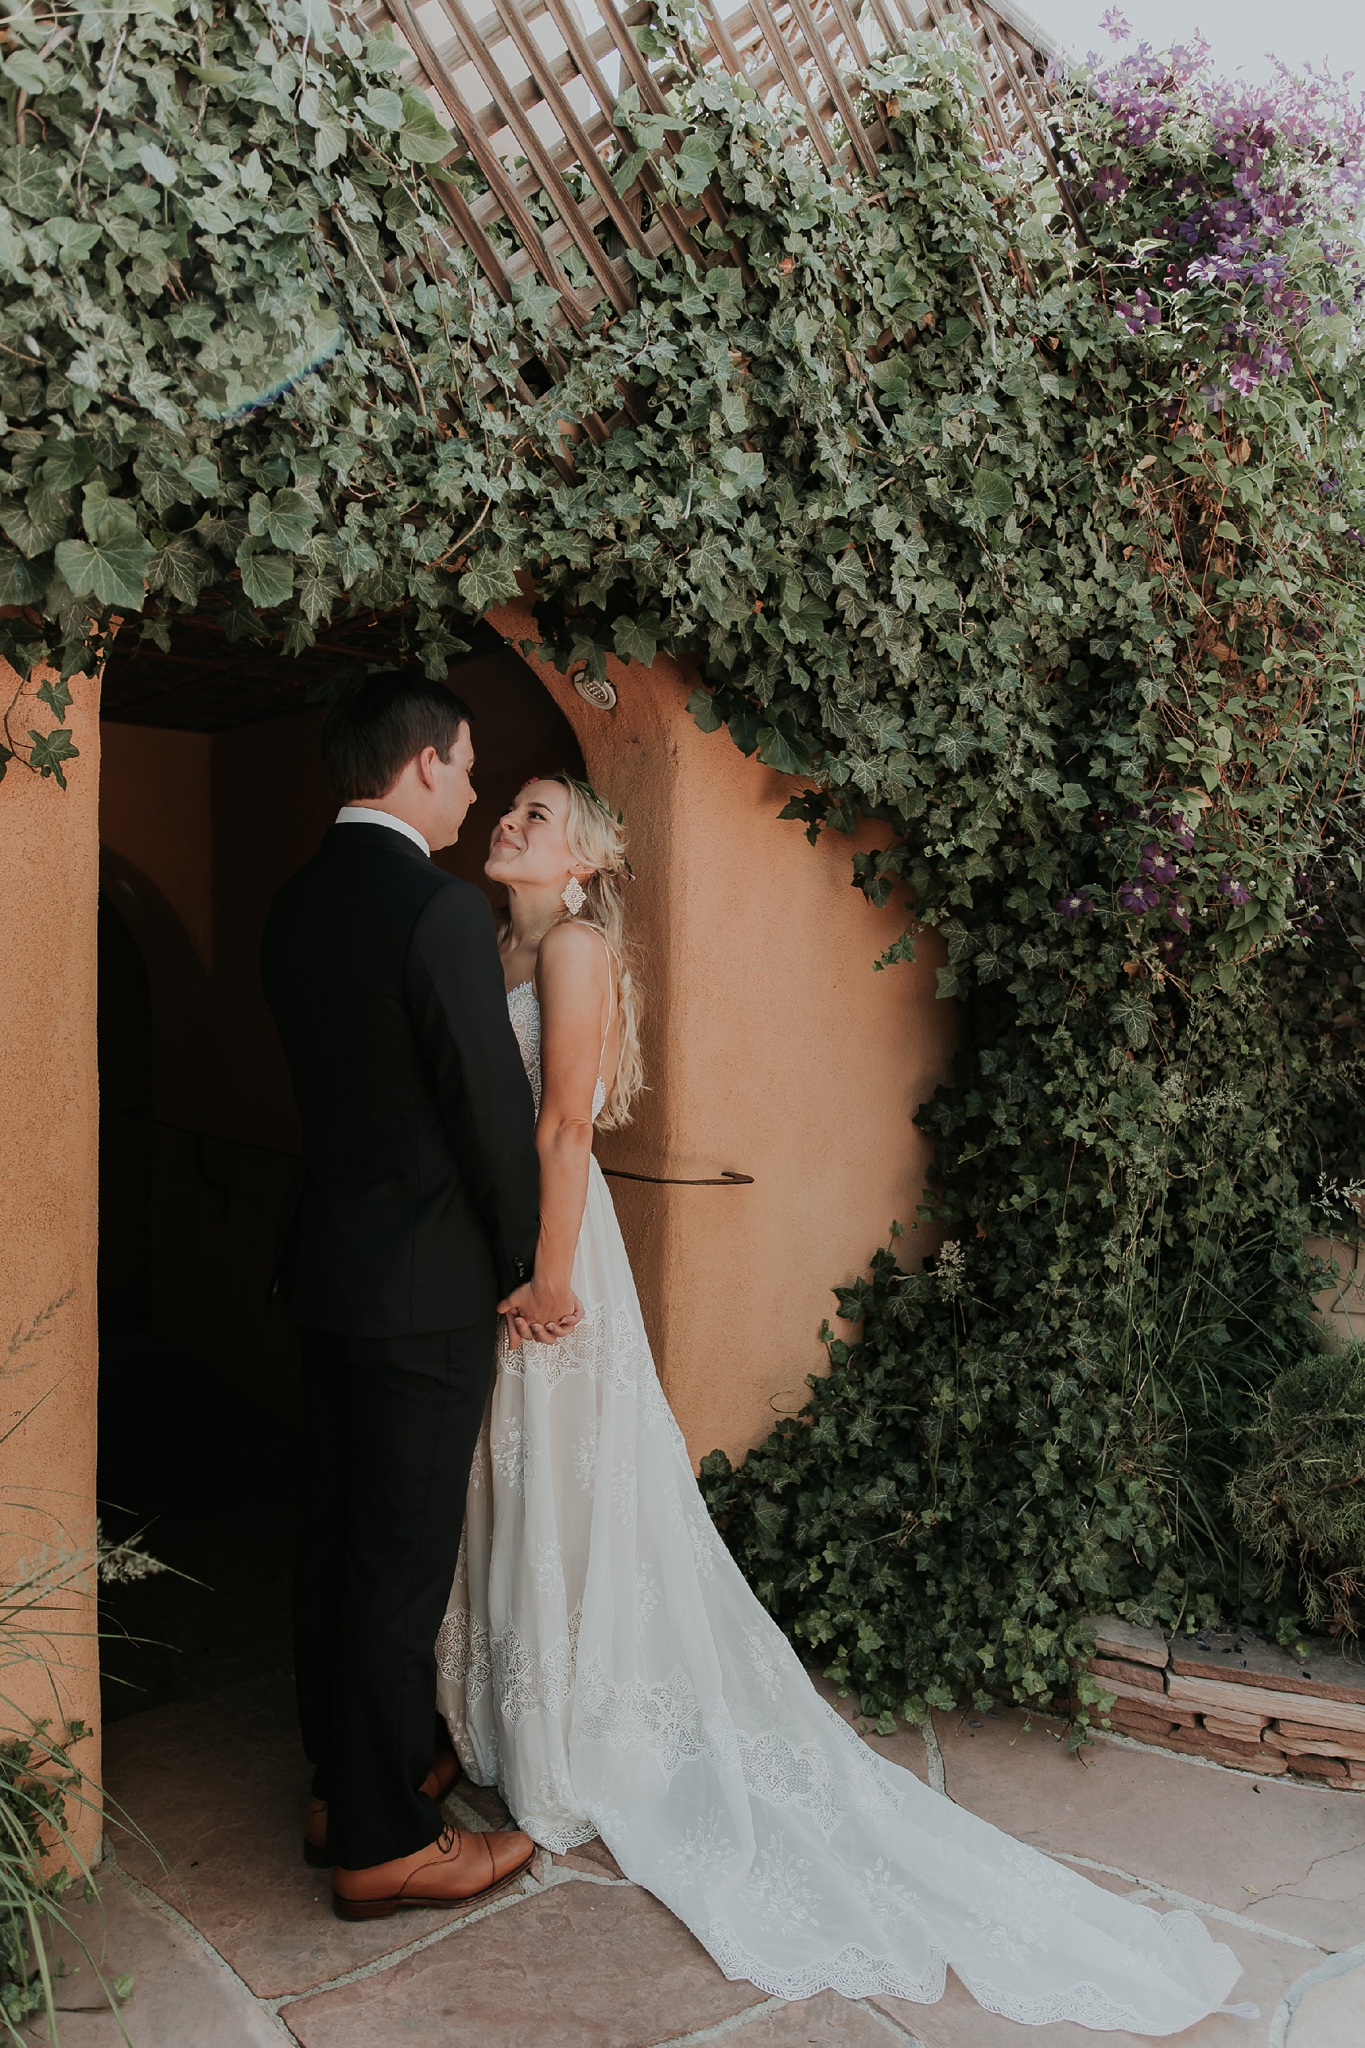 Alicia+lucia+photography+-+albuquerque+wedding+photographer+-+santa+fe+wedding+photography+-+new+mexico+wedding+photographer+-+new+mexico+wedding+-+wedding+gowns+-+bridal+gowns+-+a+line+wedding+gown_0051.jpg